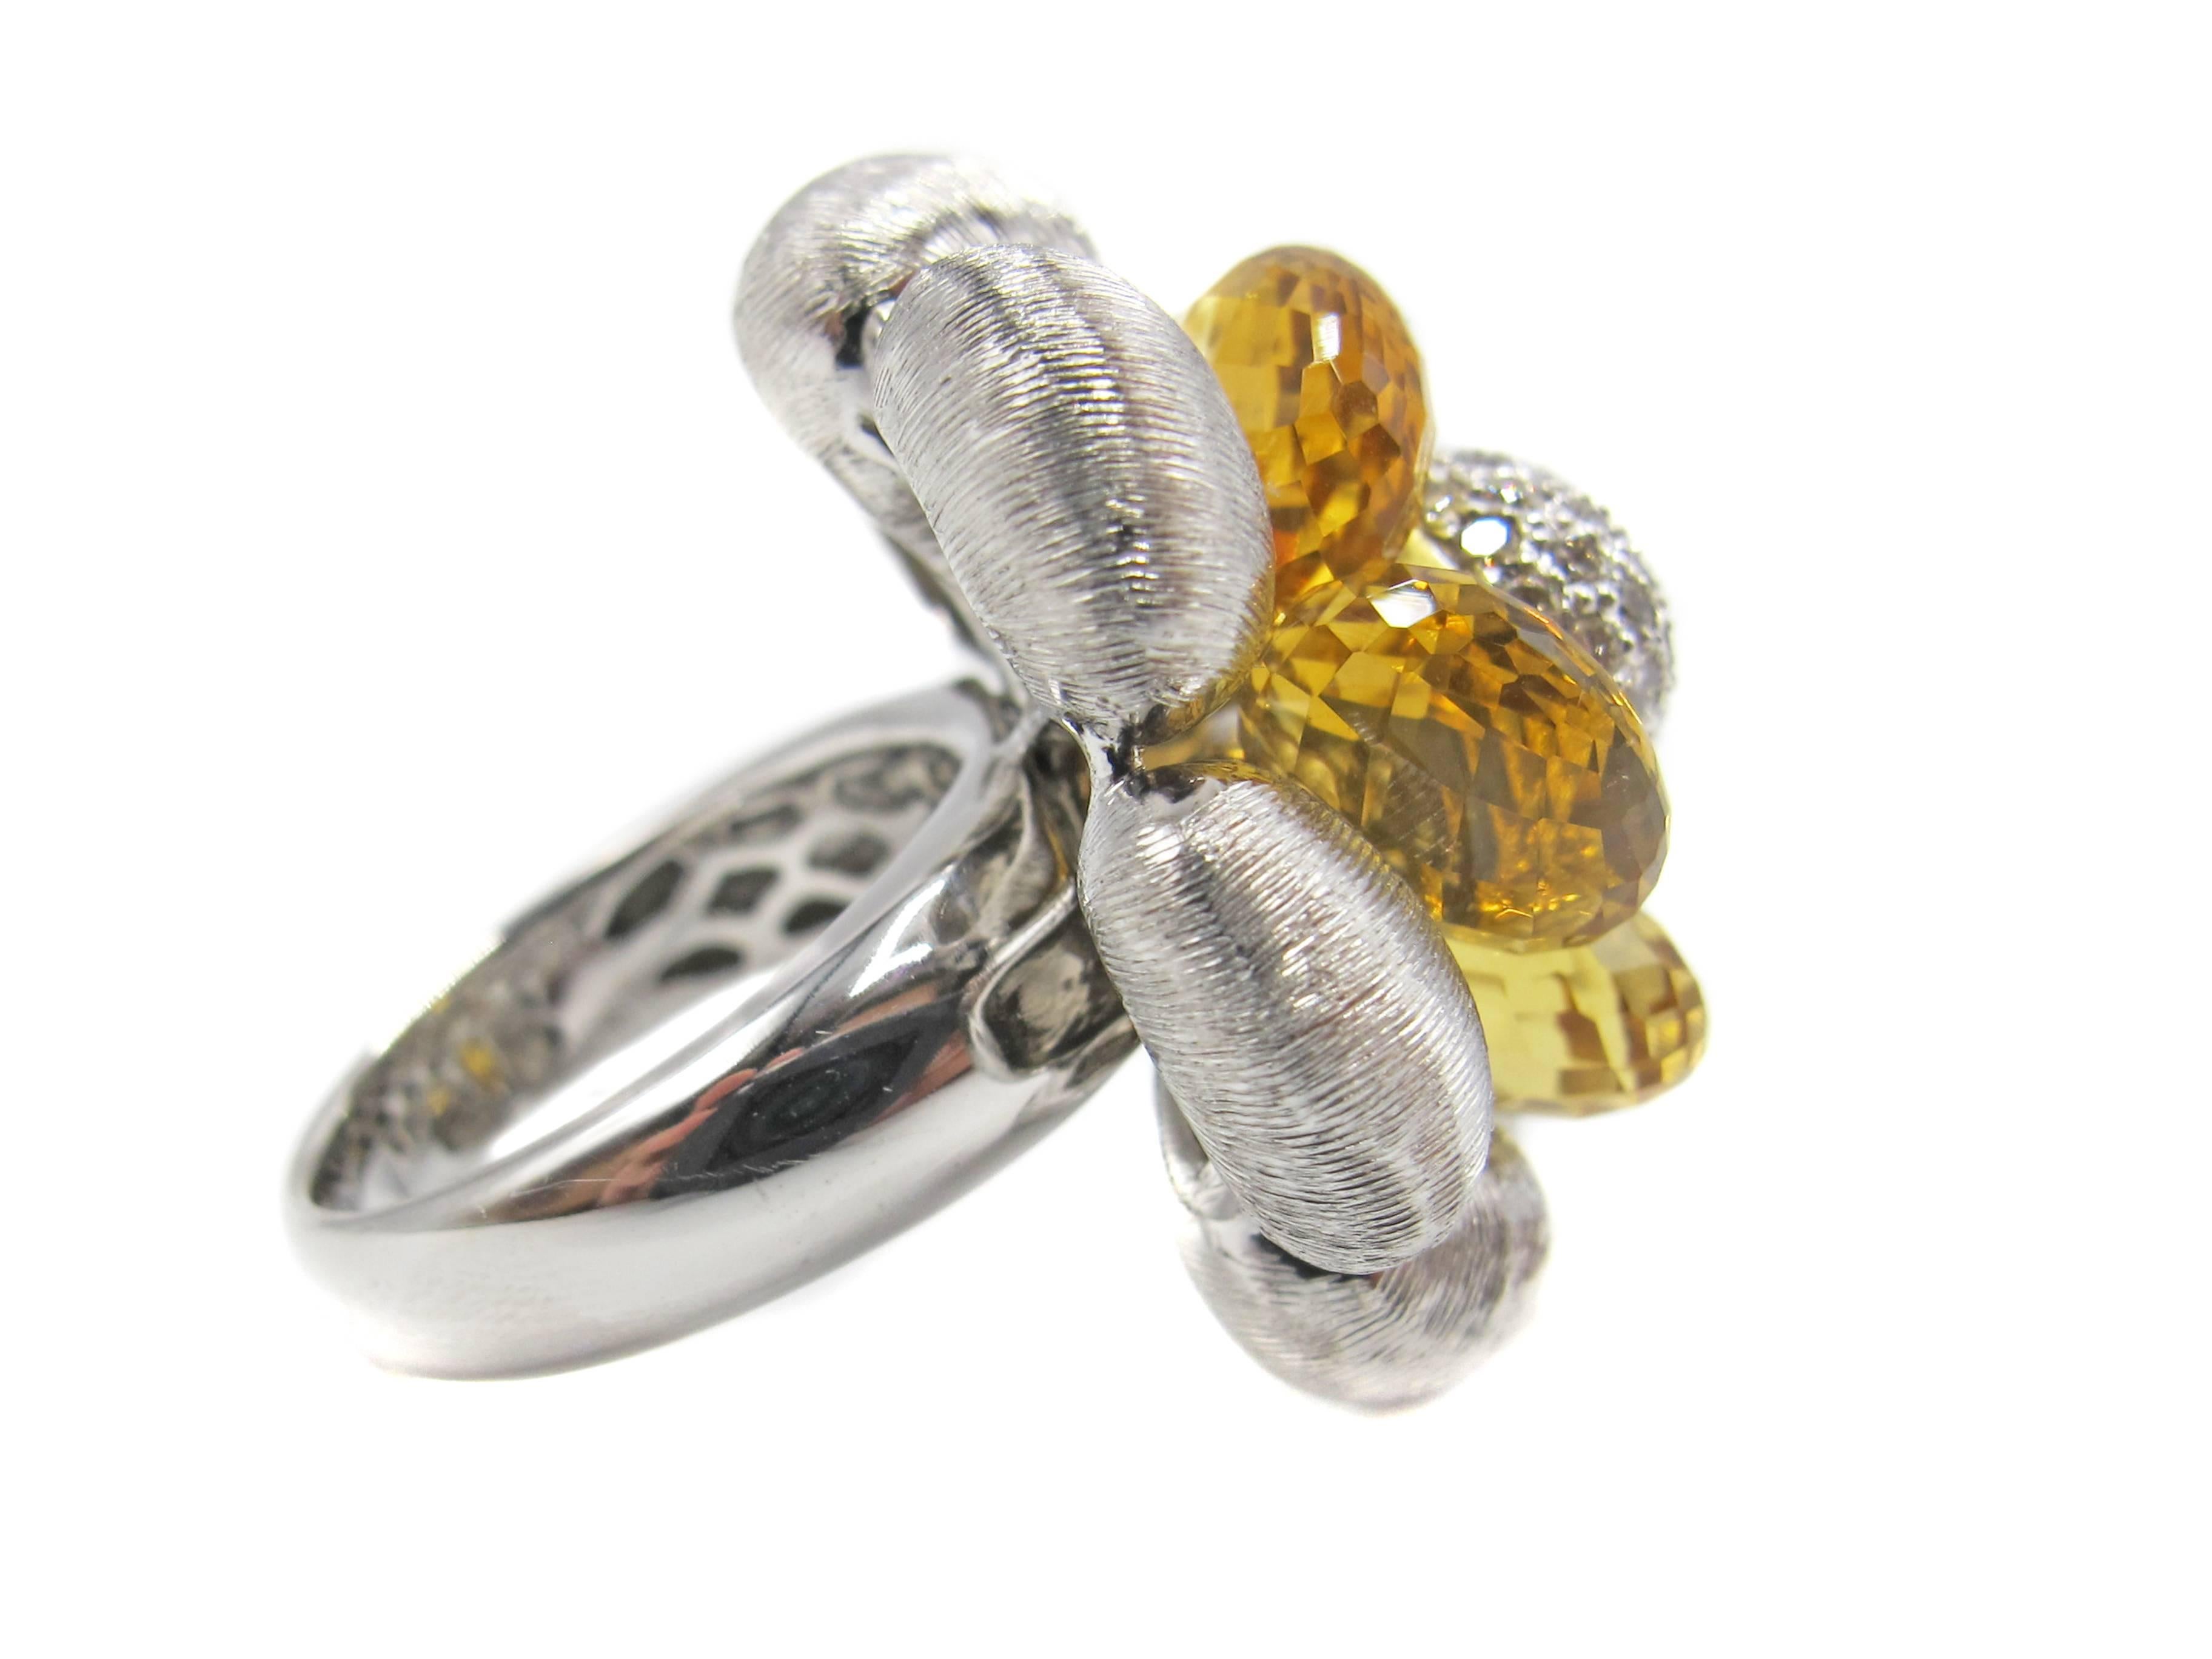 Fun and extravagant Citrine and diamond flower blossom ring hand crafted out of 18 karat white gold.The ring is designed with 7 curved and ribbed petals surrounding a blossom of 5 gold color Citrine briolettes. The briolettes are connected by a wire